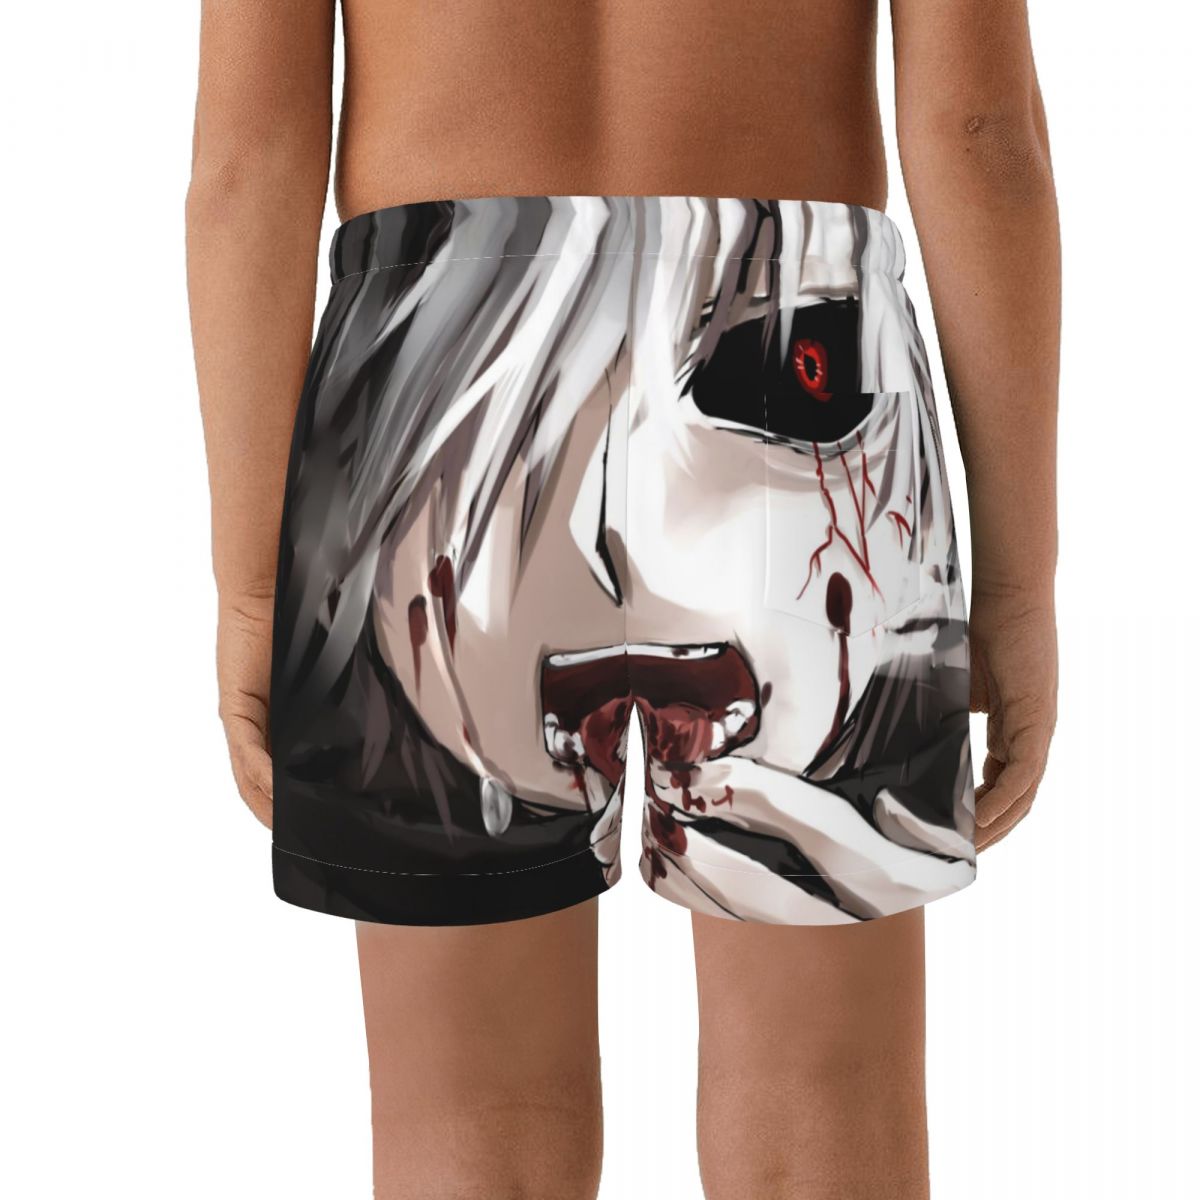 Tokyo Ghoul Hot sell swimming Trunks boy s Beach shorts Hi Q Swimwear with Pocket trunks 2 - Anime Swimsuits